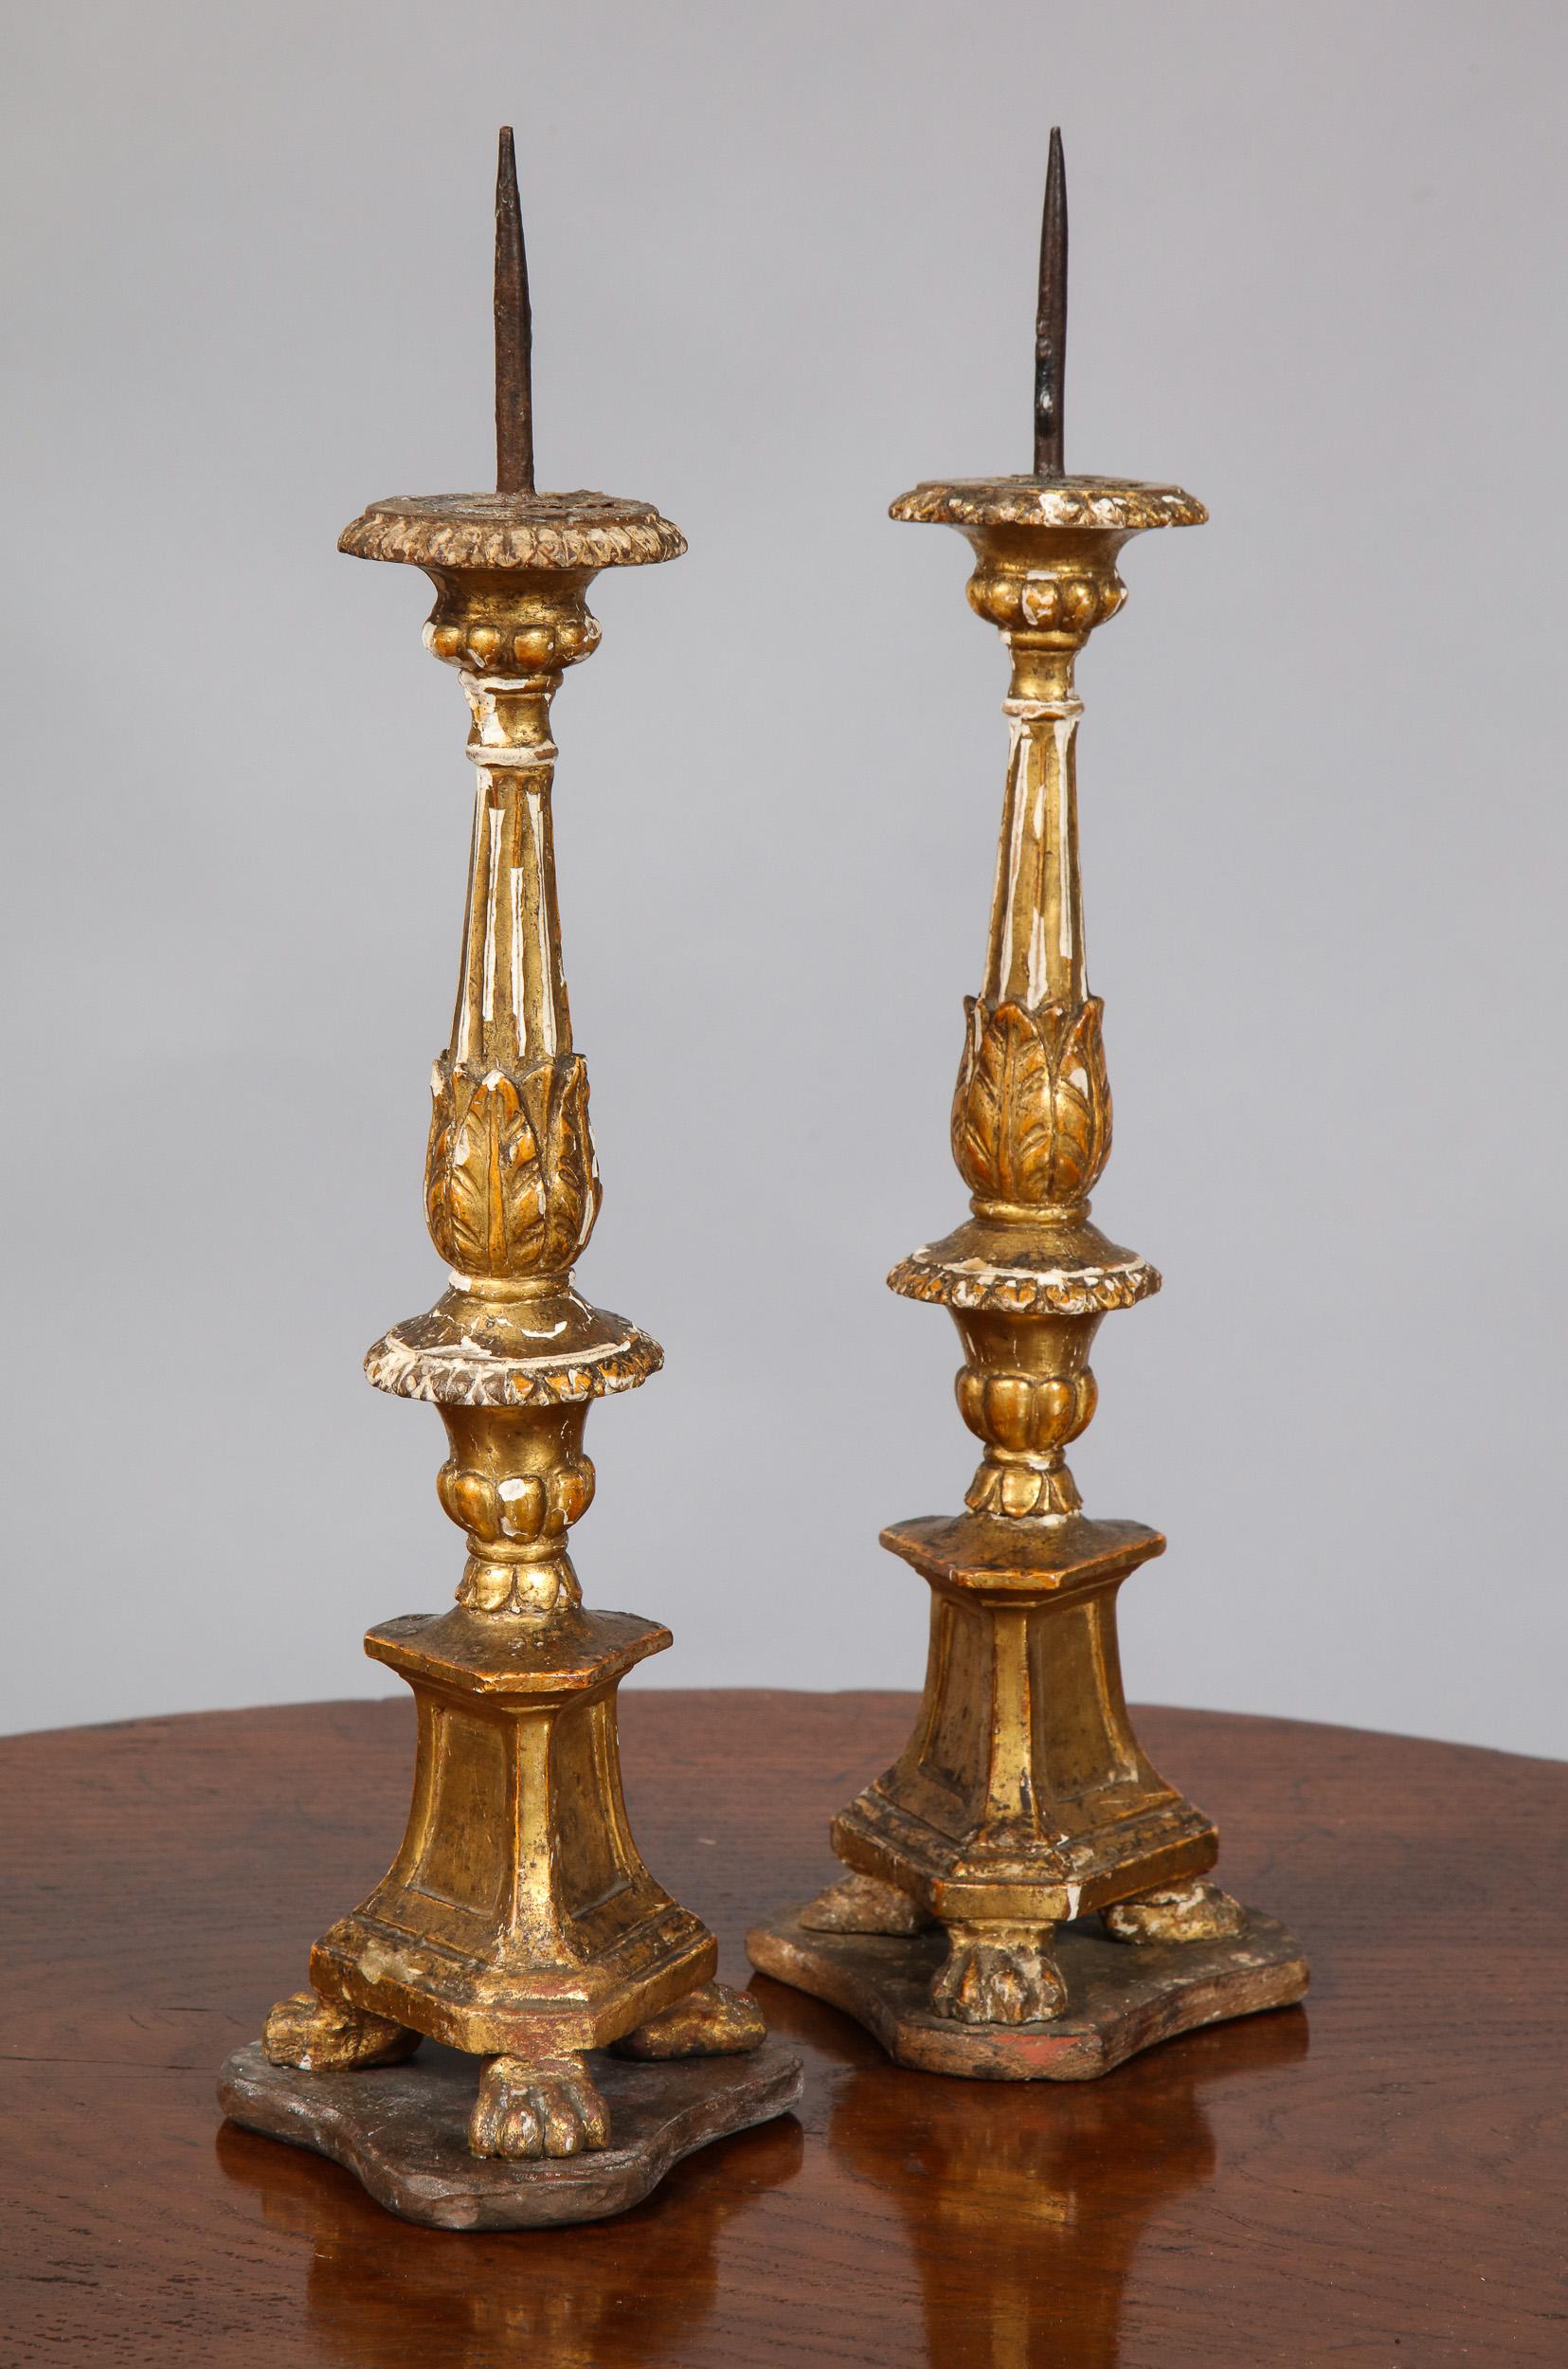 Pair of Diminutive Giltwood Pricket Candlesticks In Fair Condition For Sale In Greenwich, CT